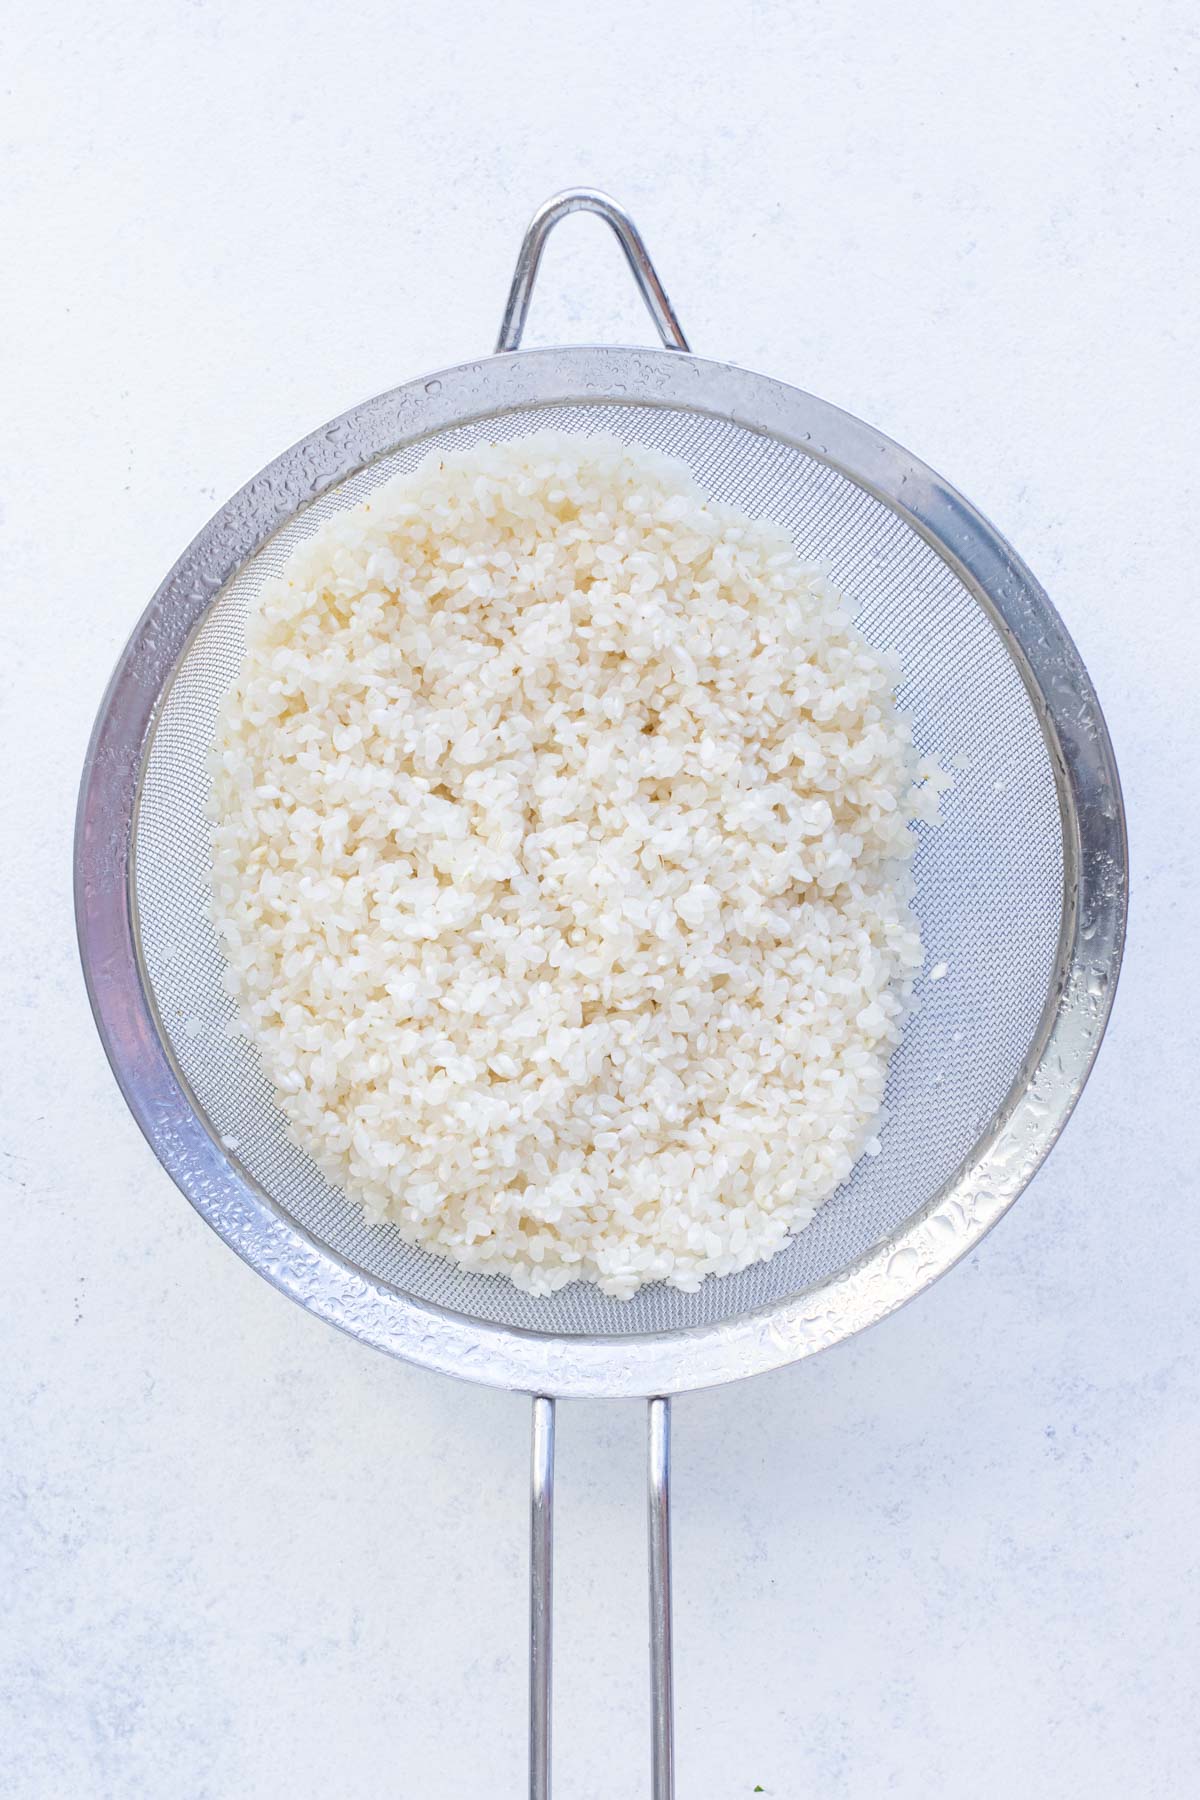 Rice is rinsed in a collander.